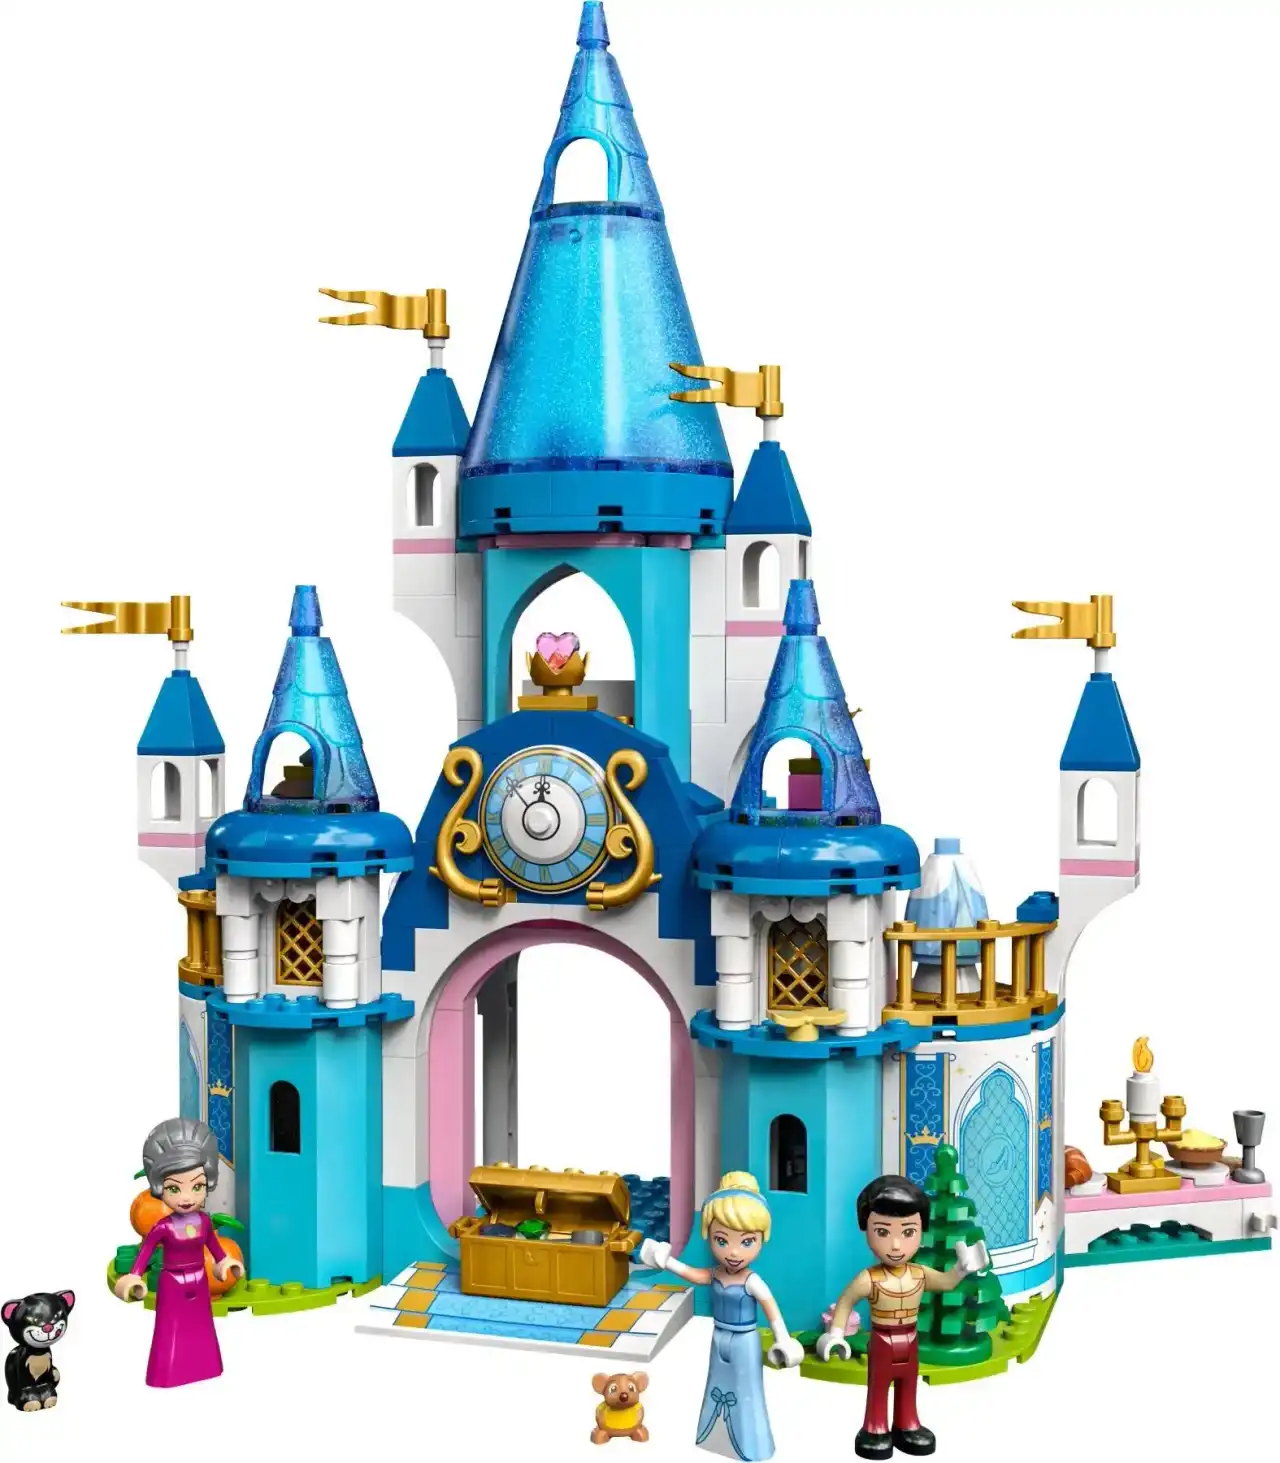 43206 - Cinderella and Prince Charming's Castle